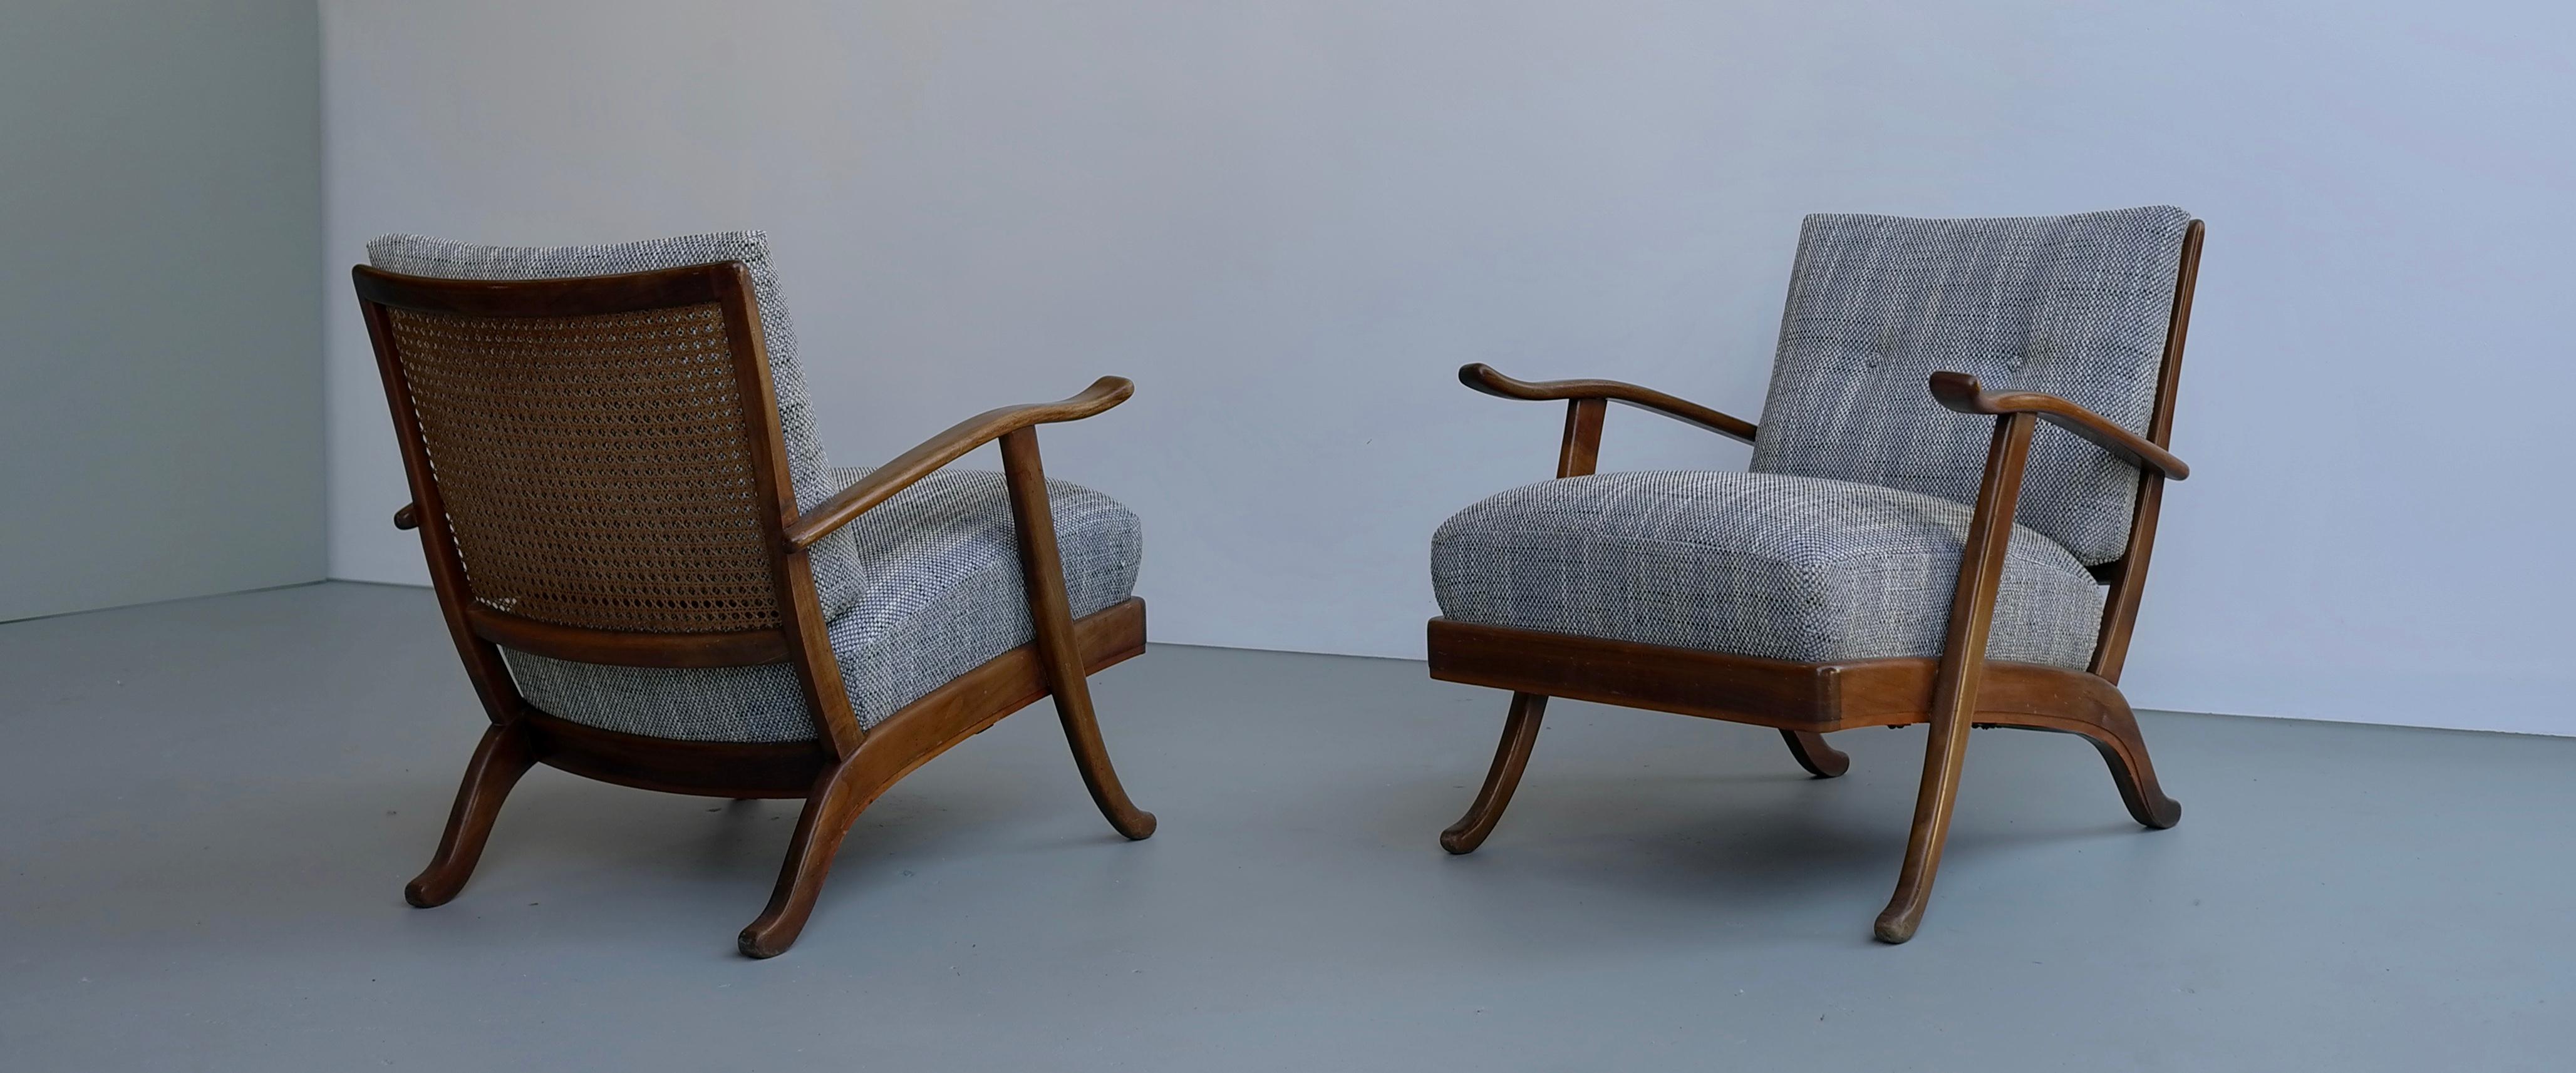 Pair of Organic Lounge Chair in Wood and Wicker, Italy, 1950s 4